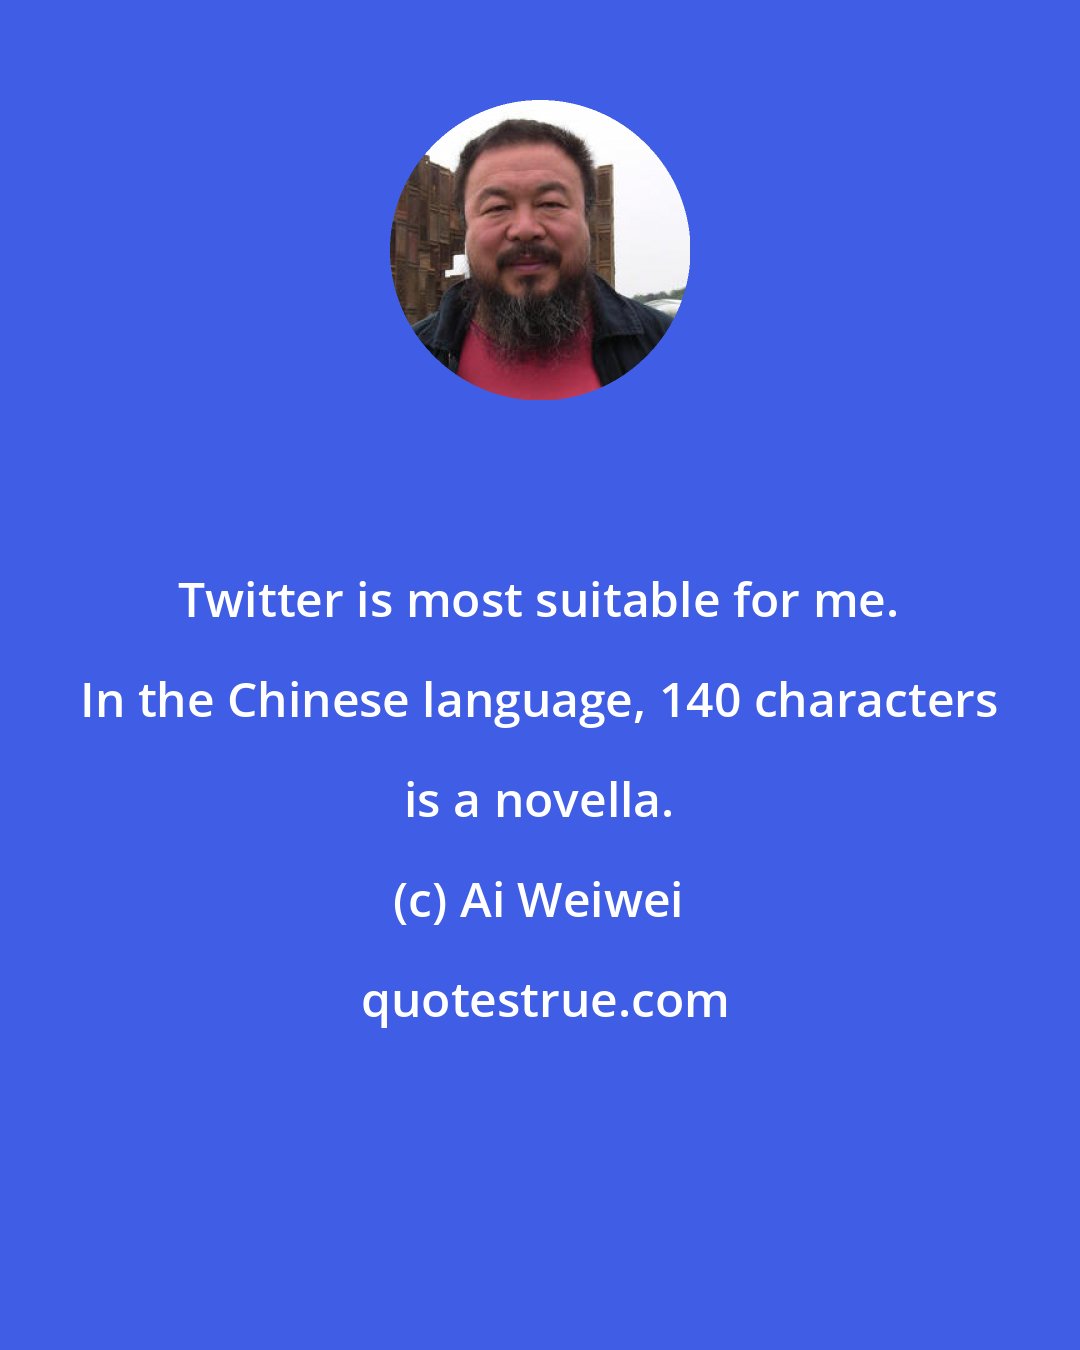 Ai Weiwei: Twitter is most suitable for me. In the Chinese language, 140 characters is a novella.